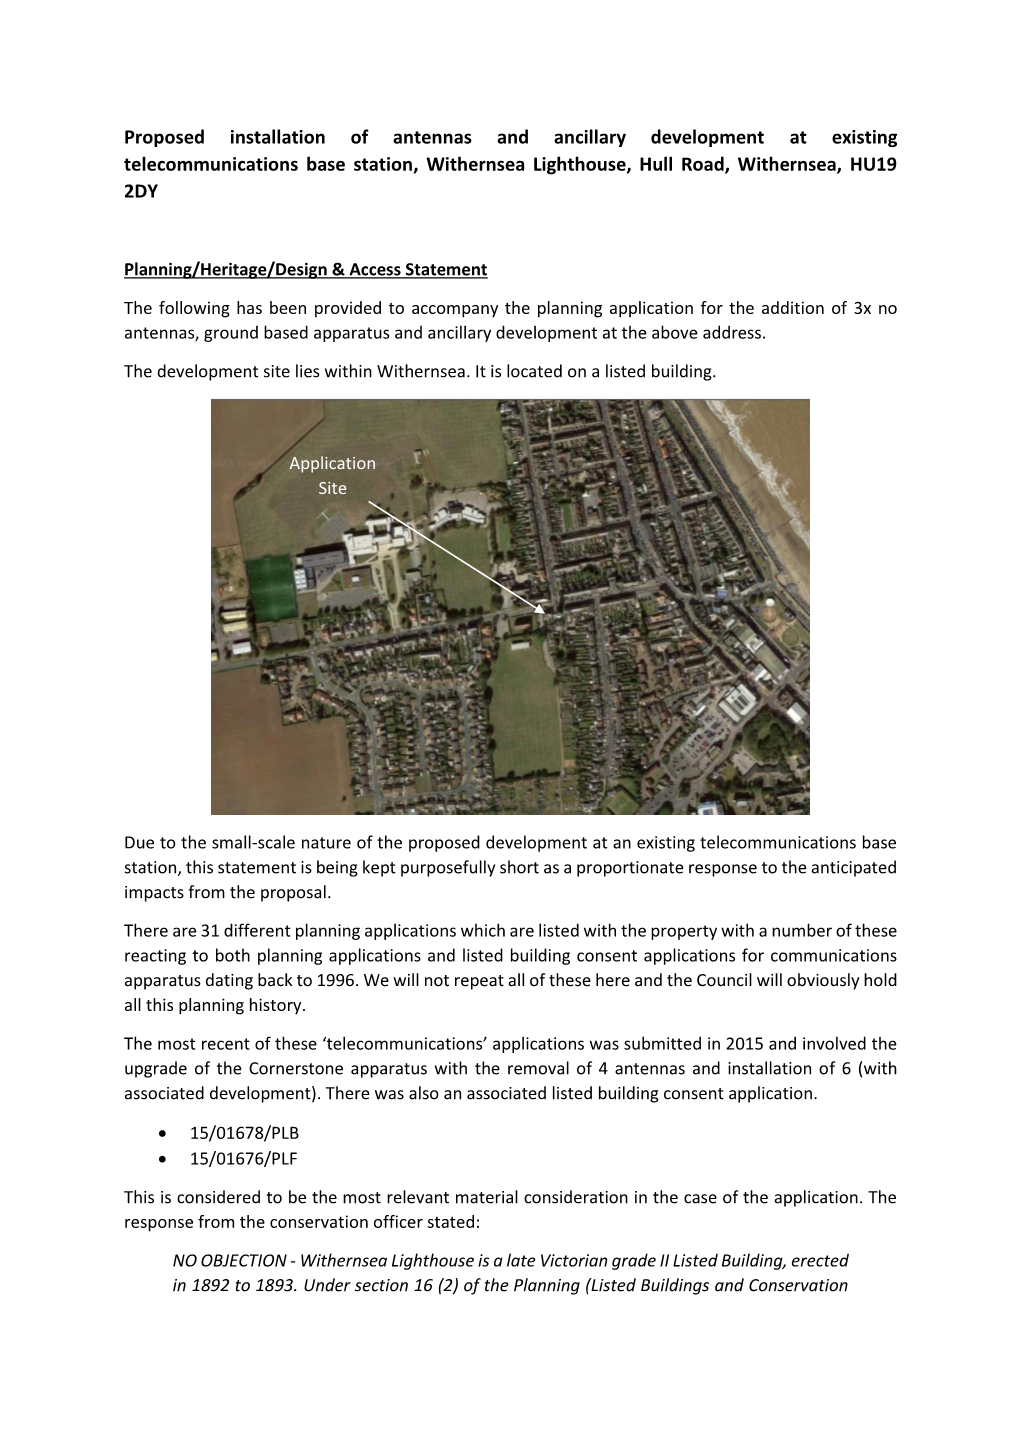 Proposed Installation of Antennas and Ancillary Development at Existing Telecommunications Base Station, Withernsea Lighthouse, Hull Road, Withernsea, HU19 2DY